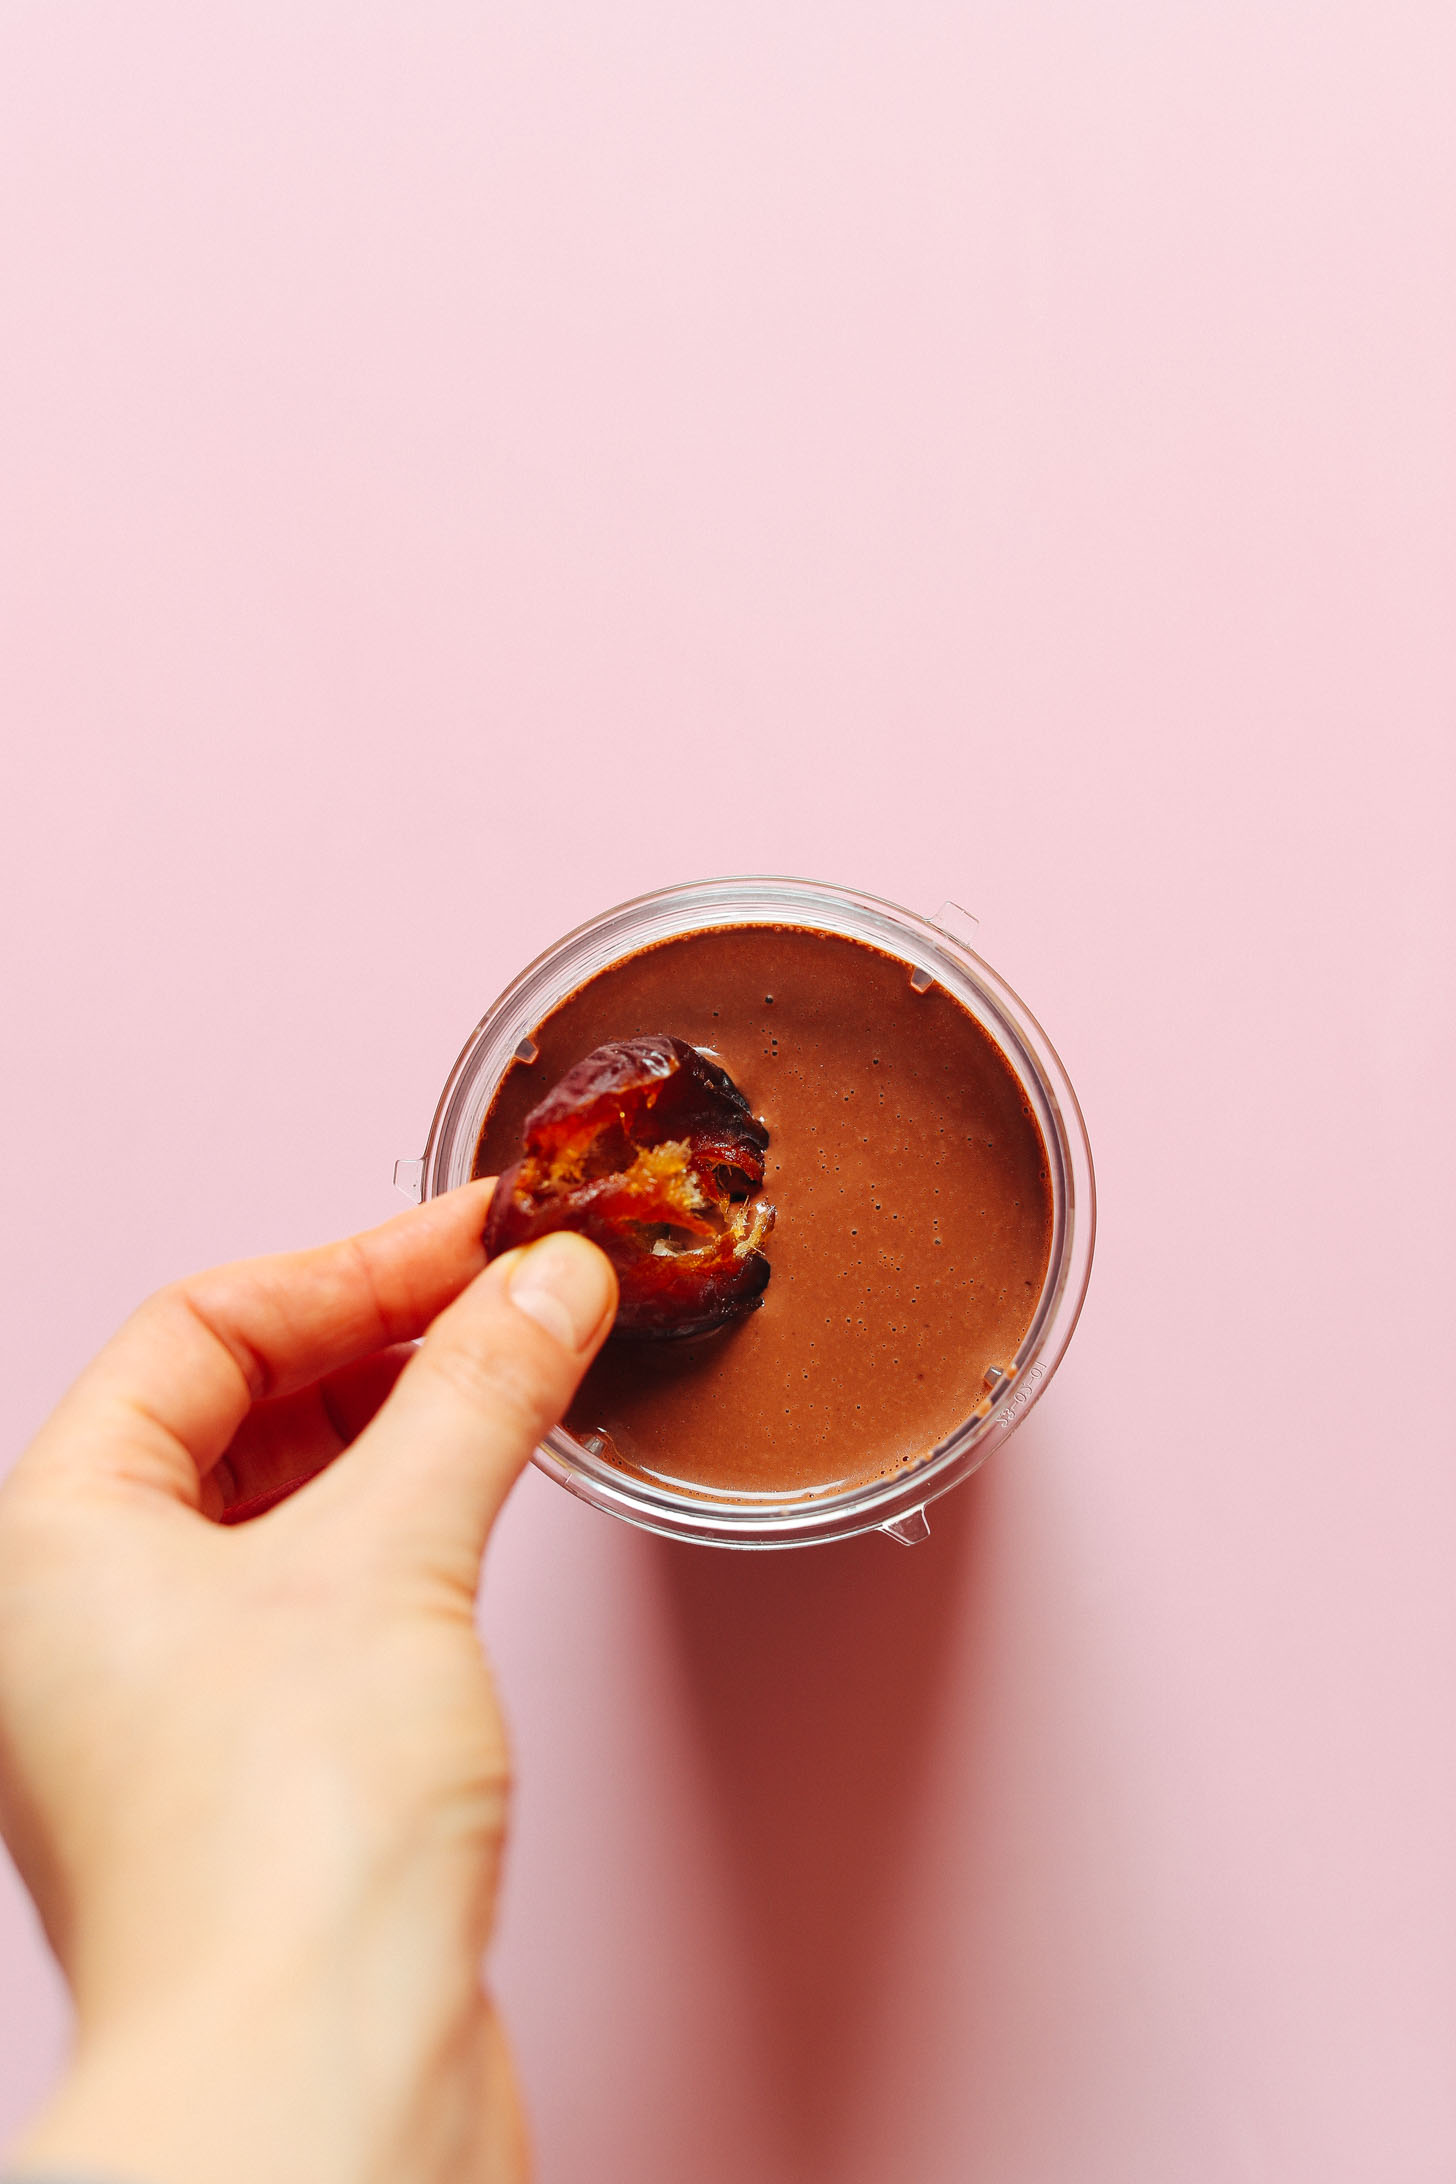 Dipping a freshly pitted date into a jar of Naturally Sweetened Vegan Chocolate Mousse